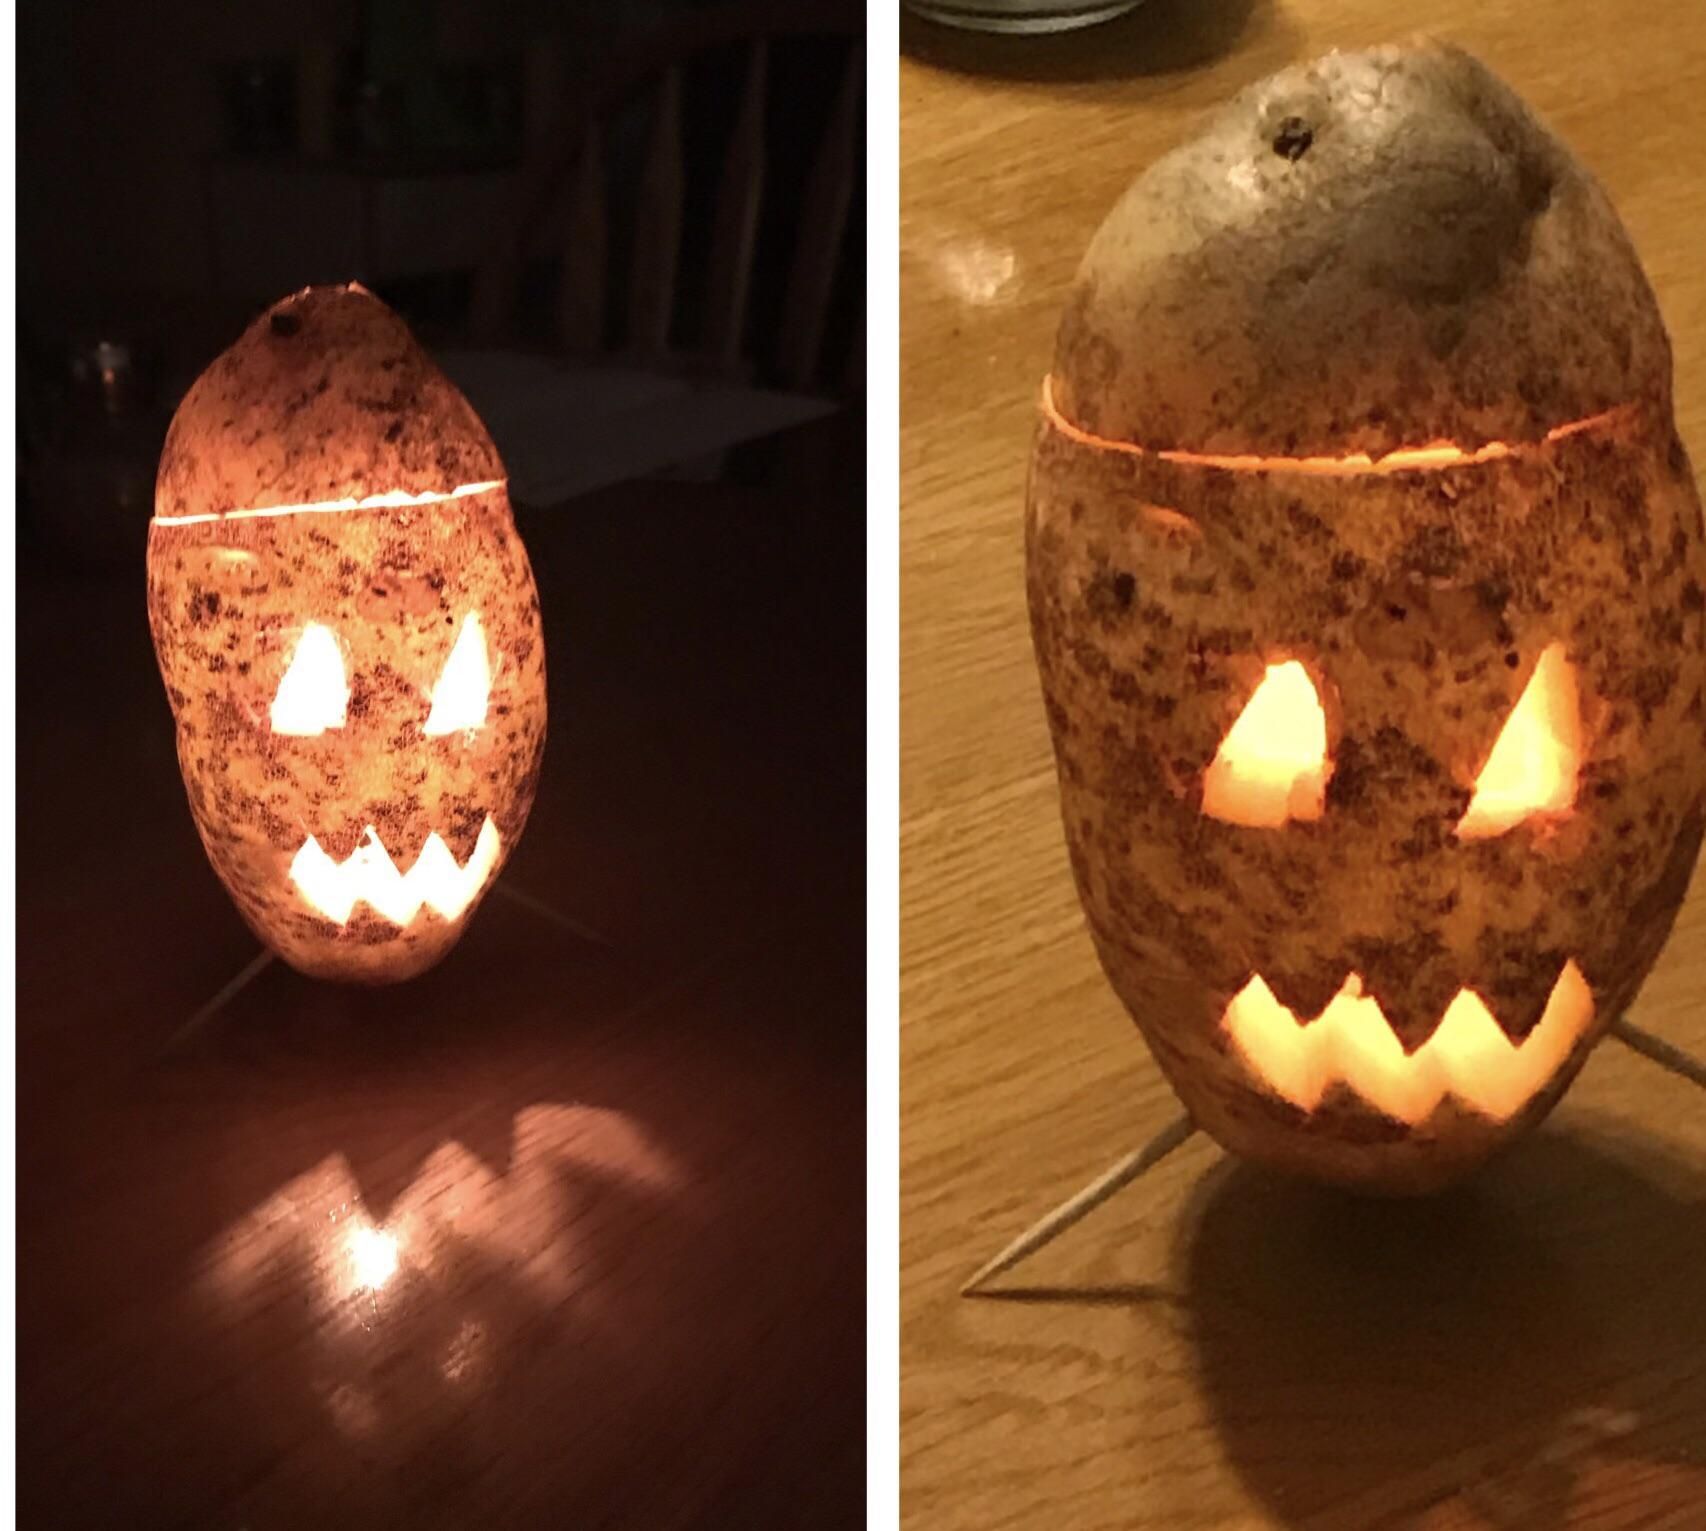 Pumpkins get too much love. I carved a Jack-o-Tater.